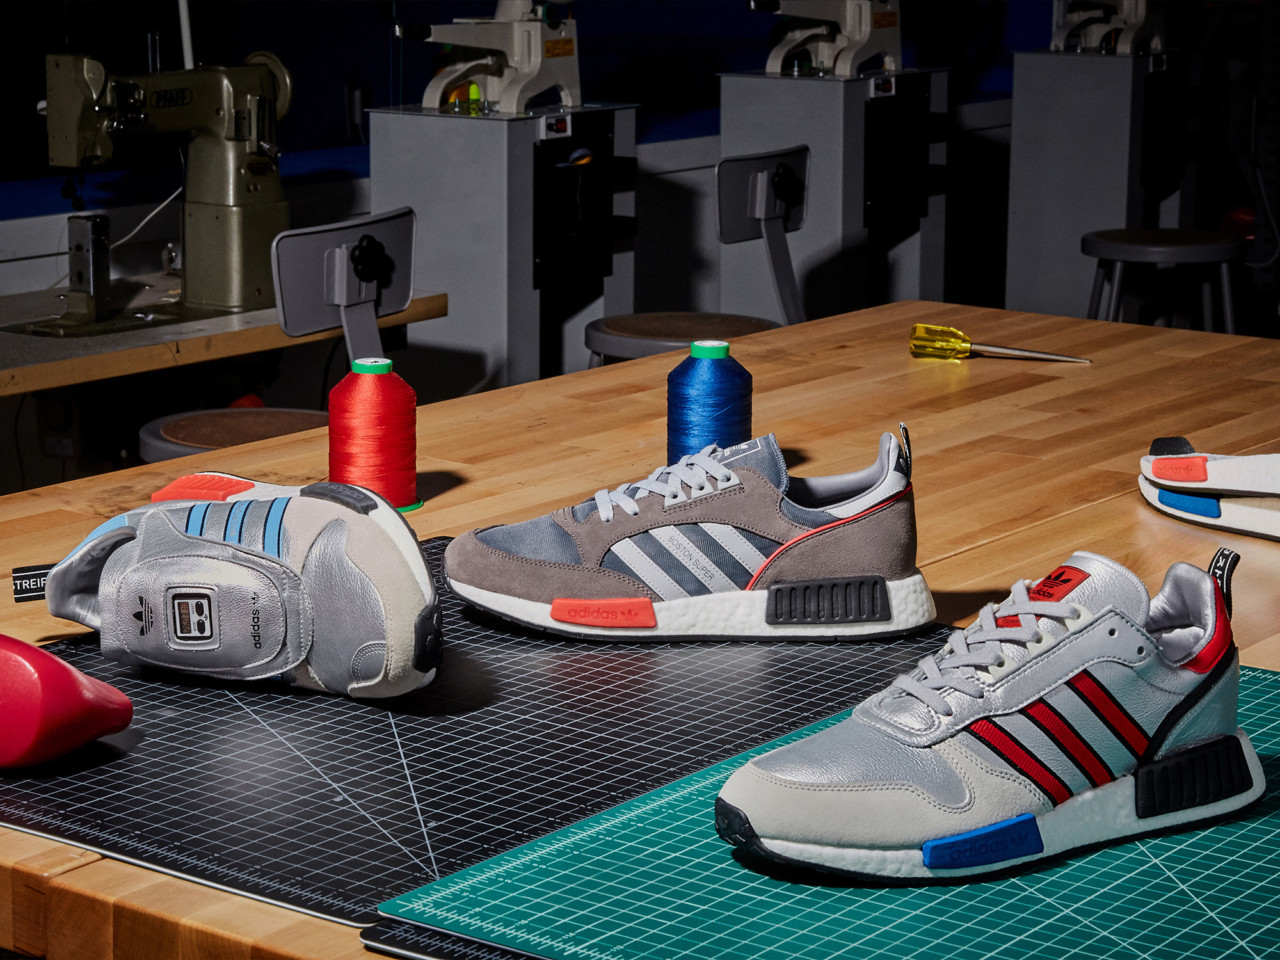 adidas Never Made Connects Past to Present